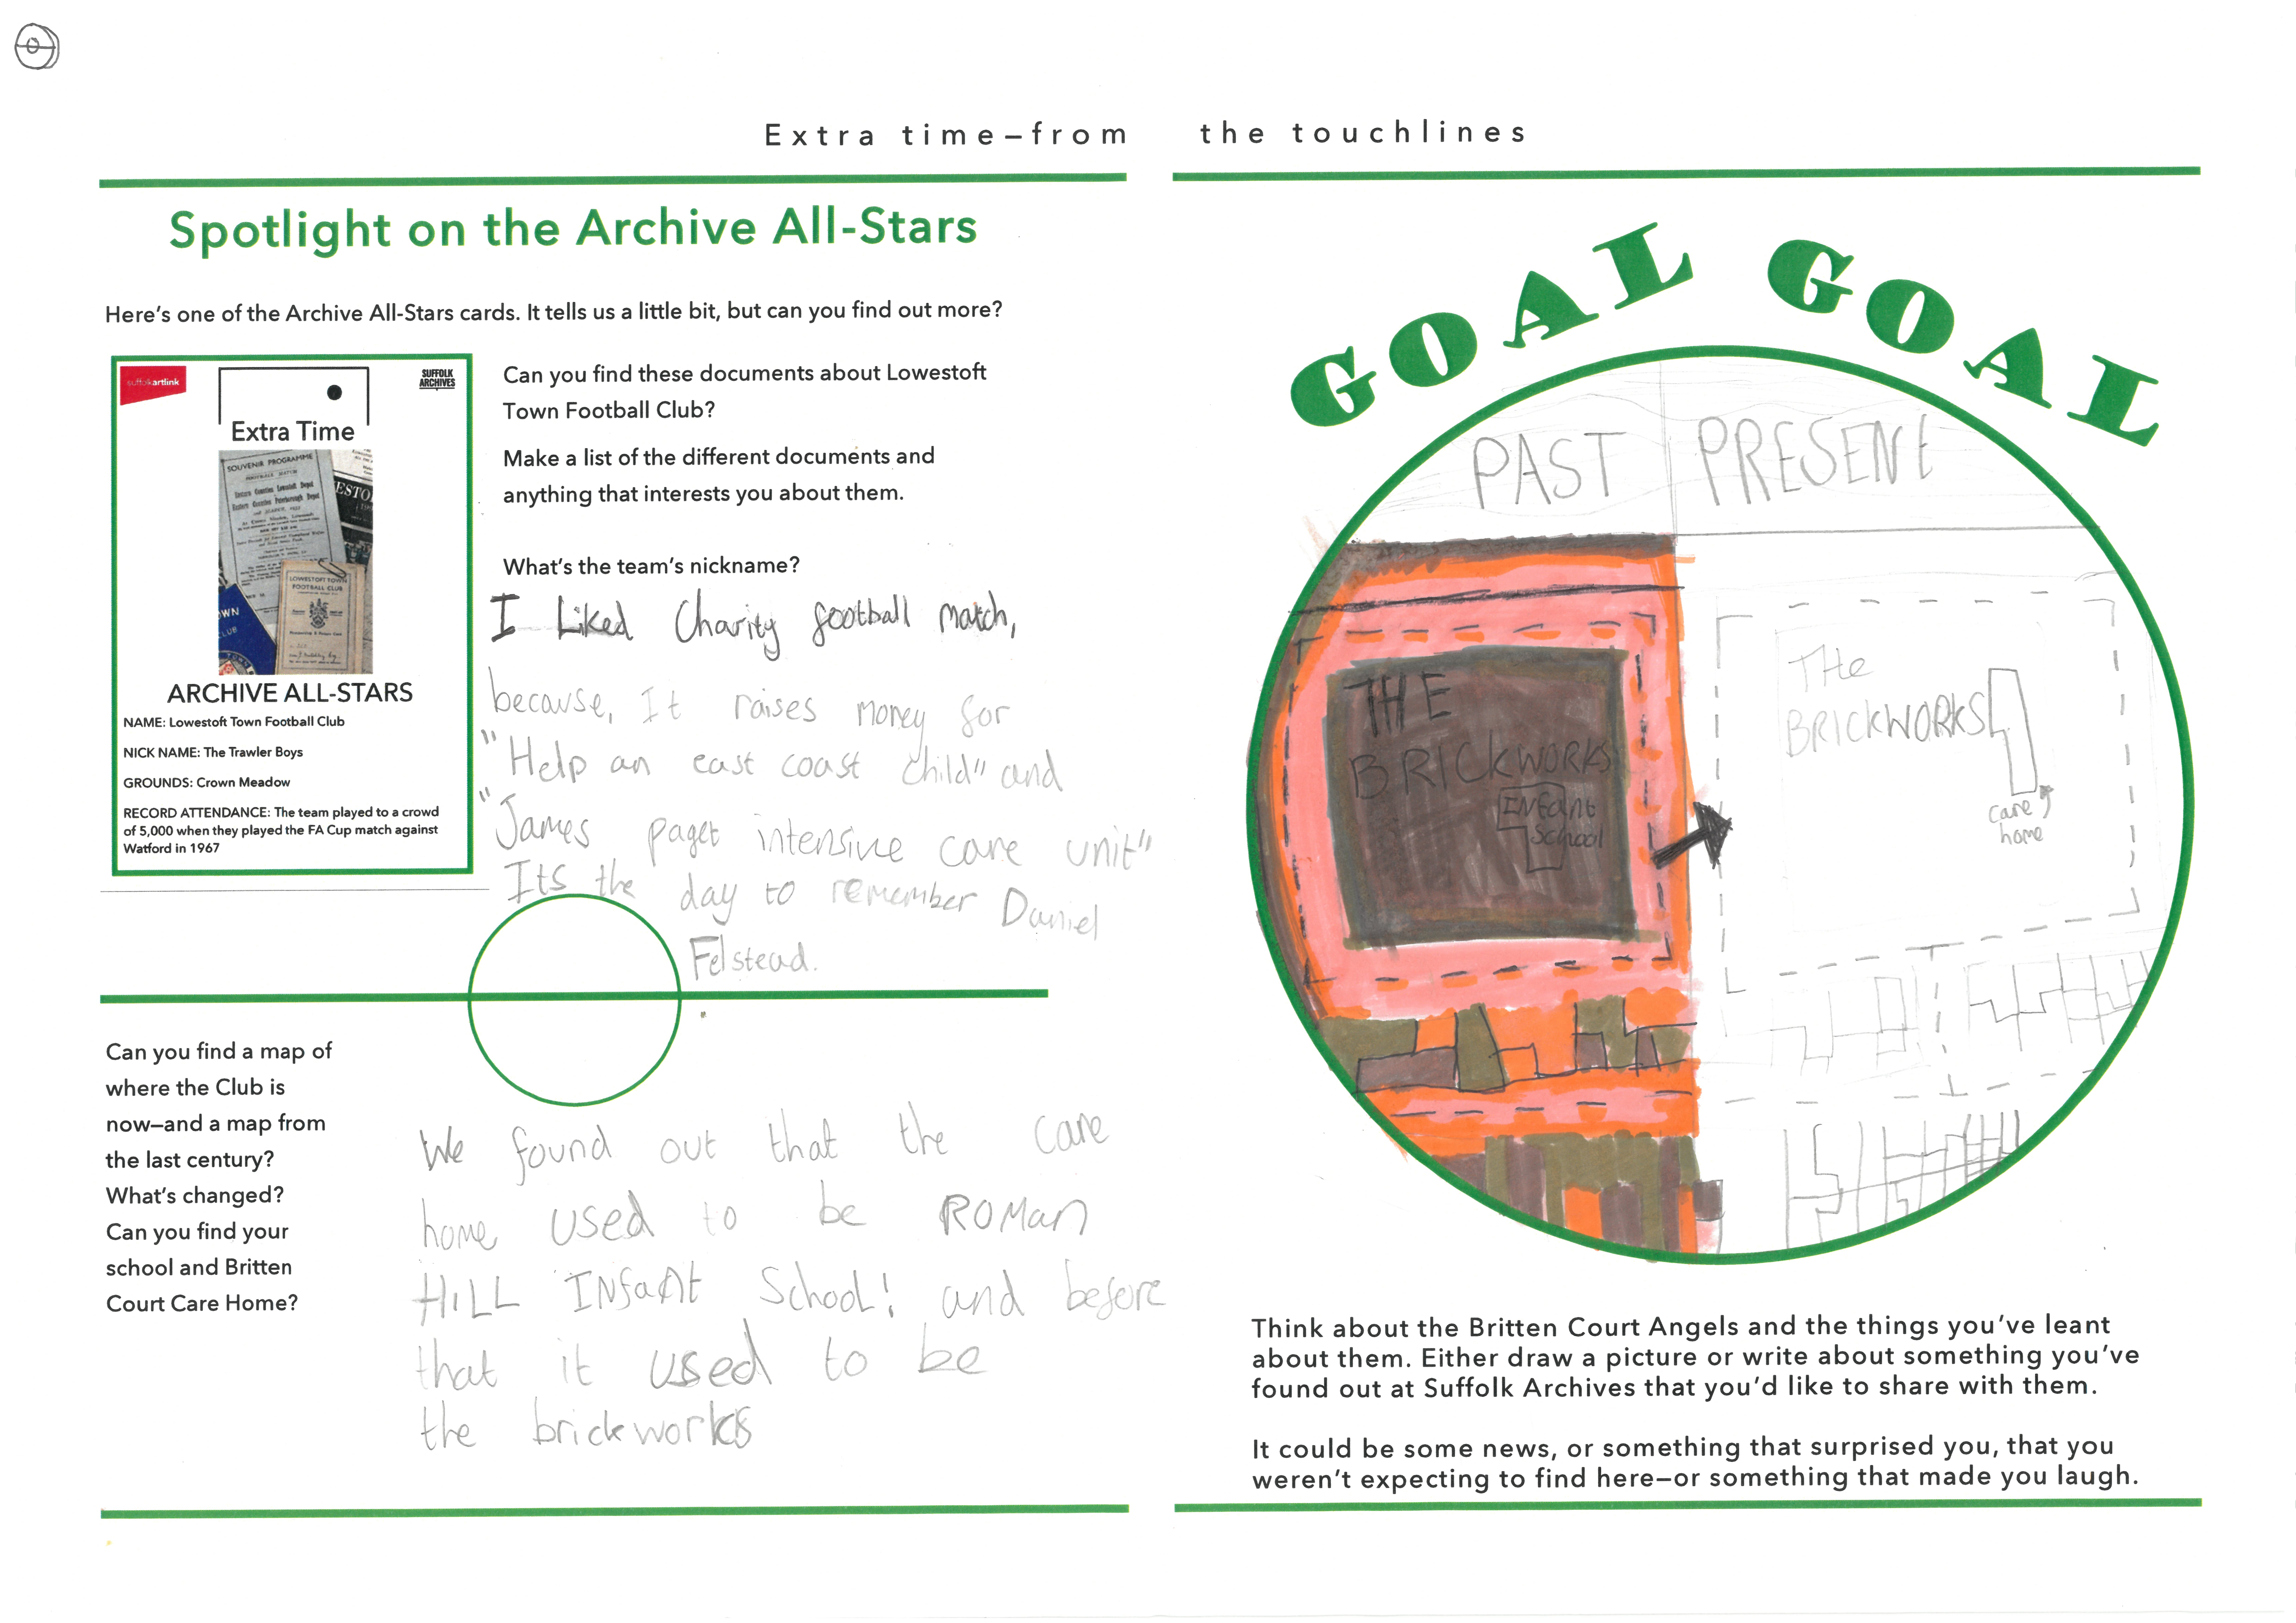 A school child's worksheet with handwritten notes and illustrations about their school being built on the site of an old brickworks